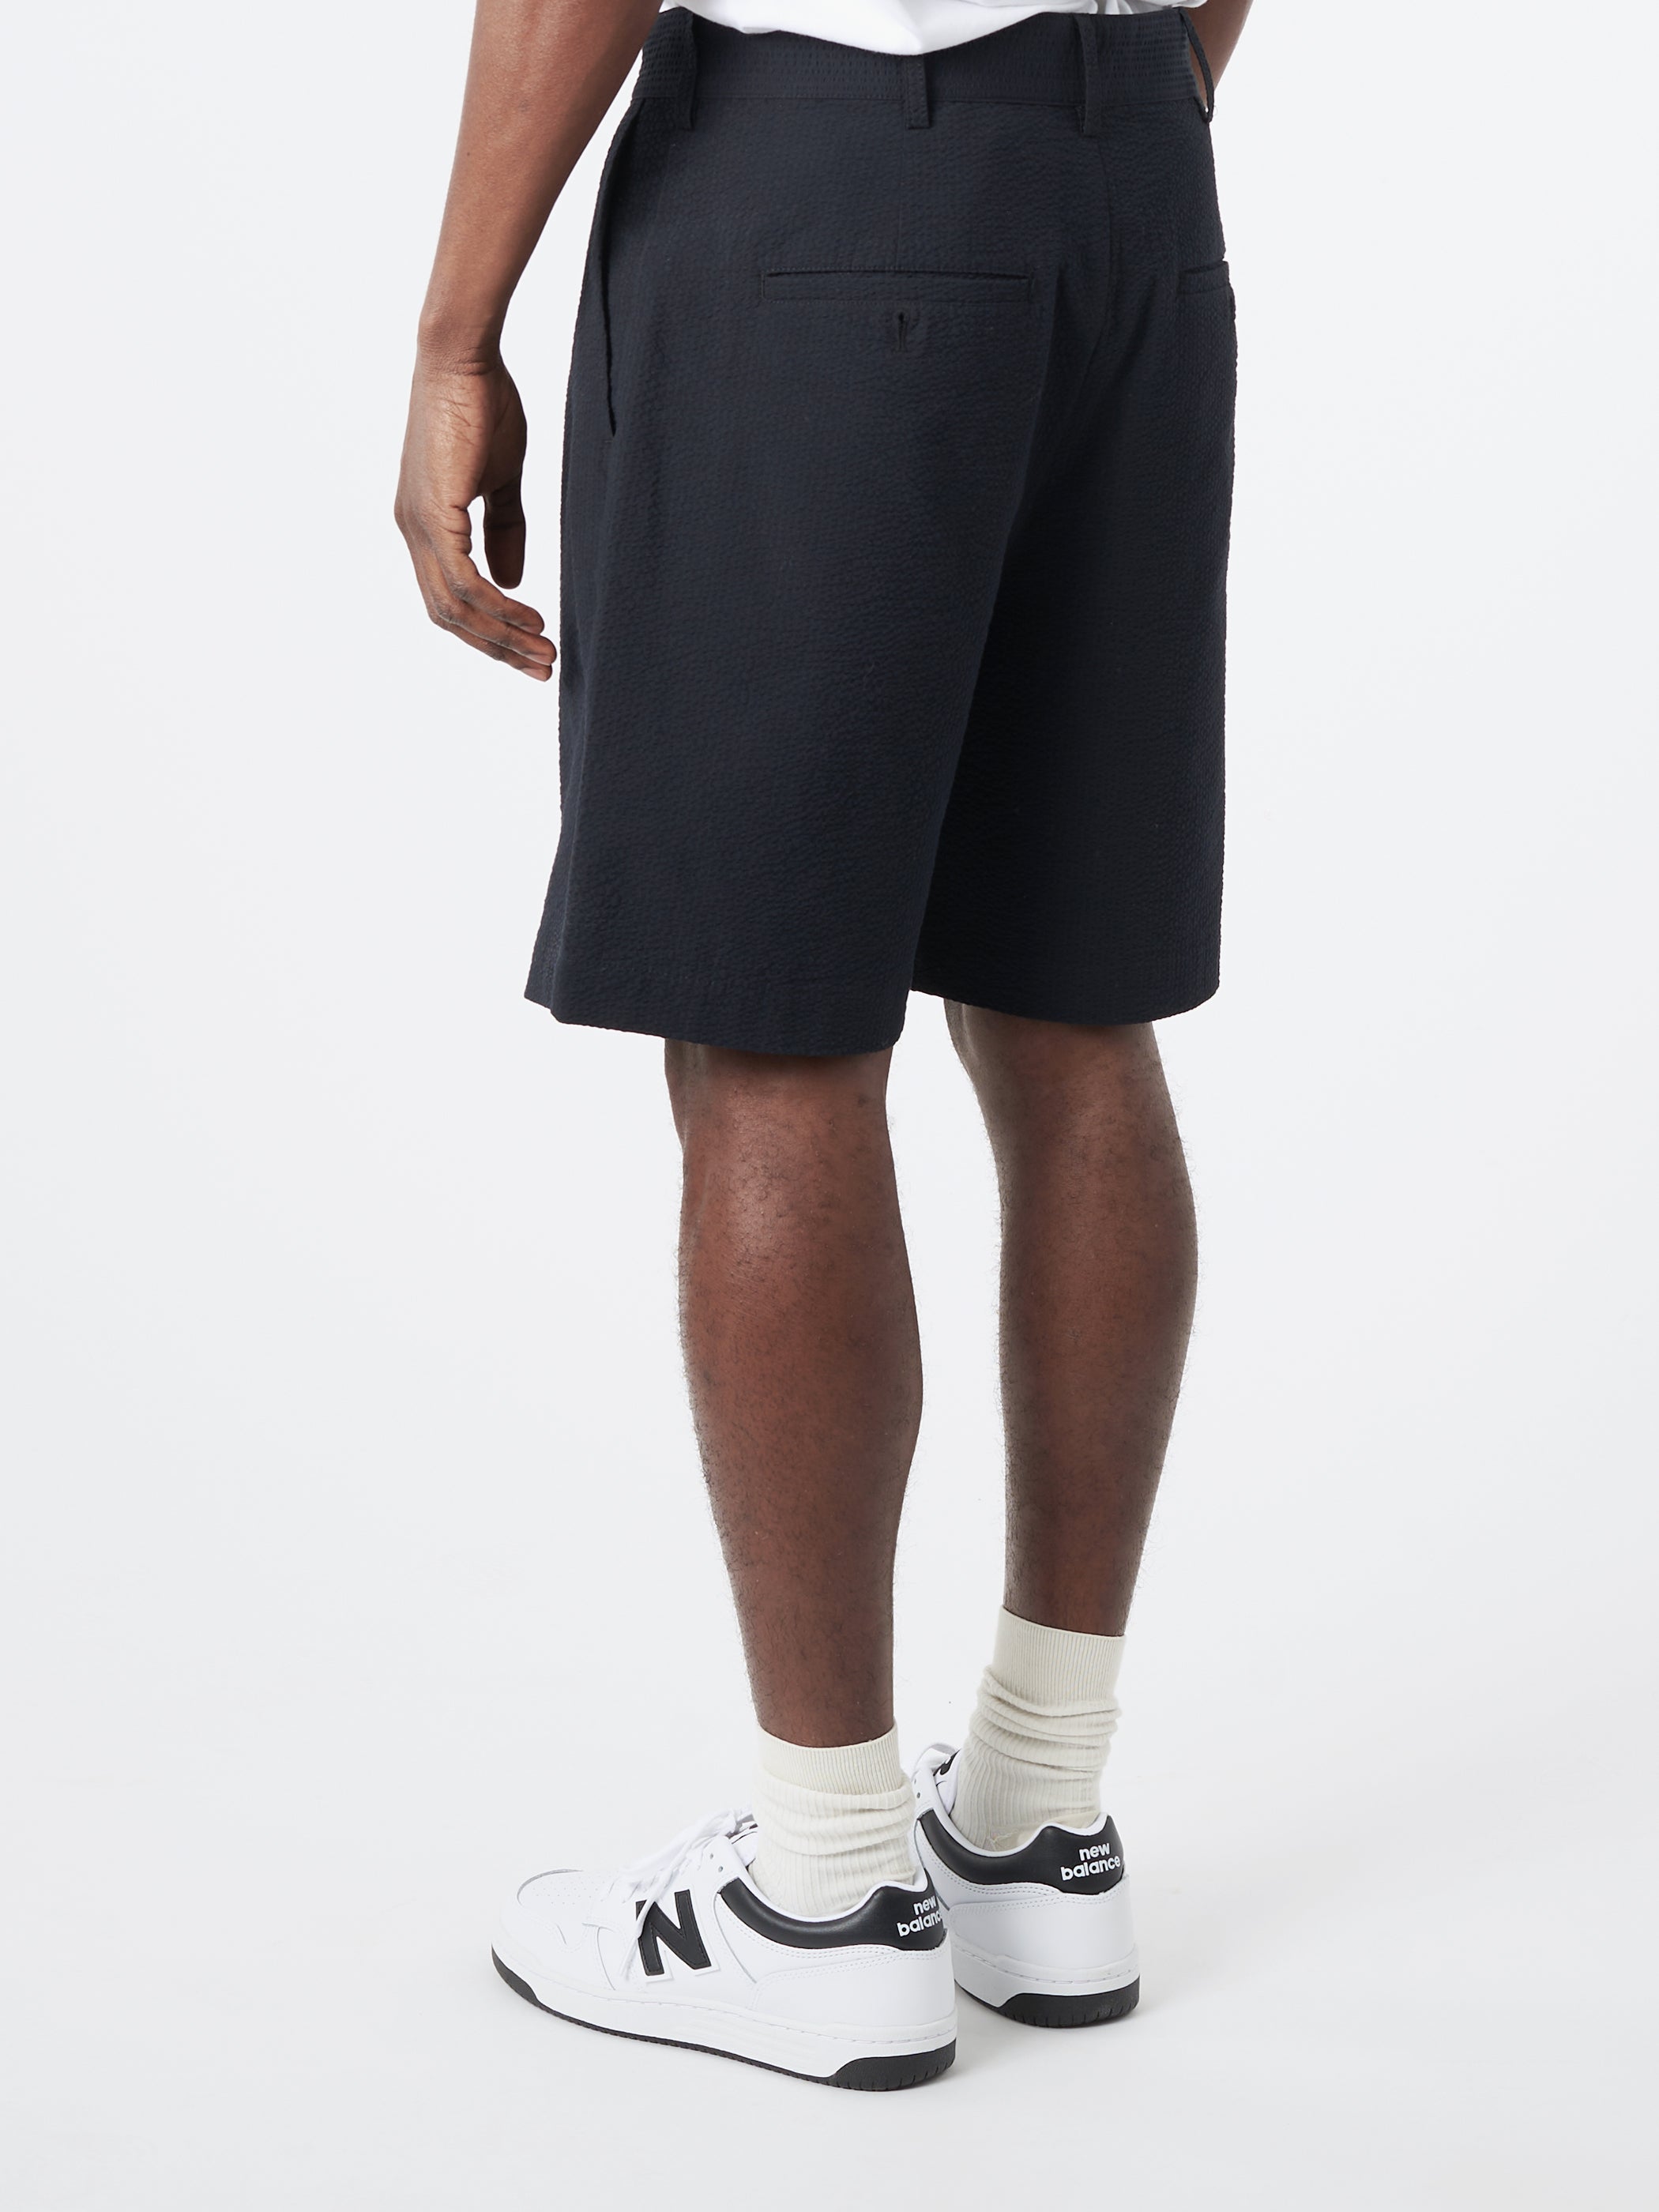 Men's Clothing – tagged shorts– gravitypope